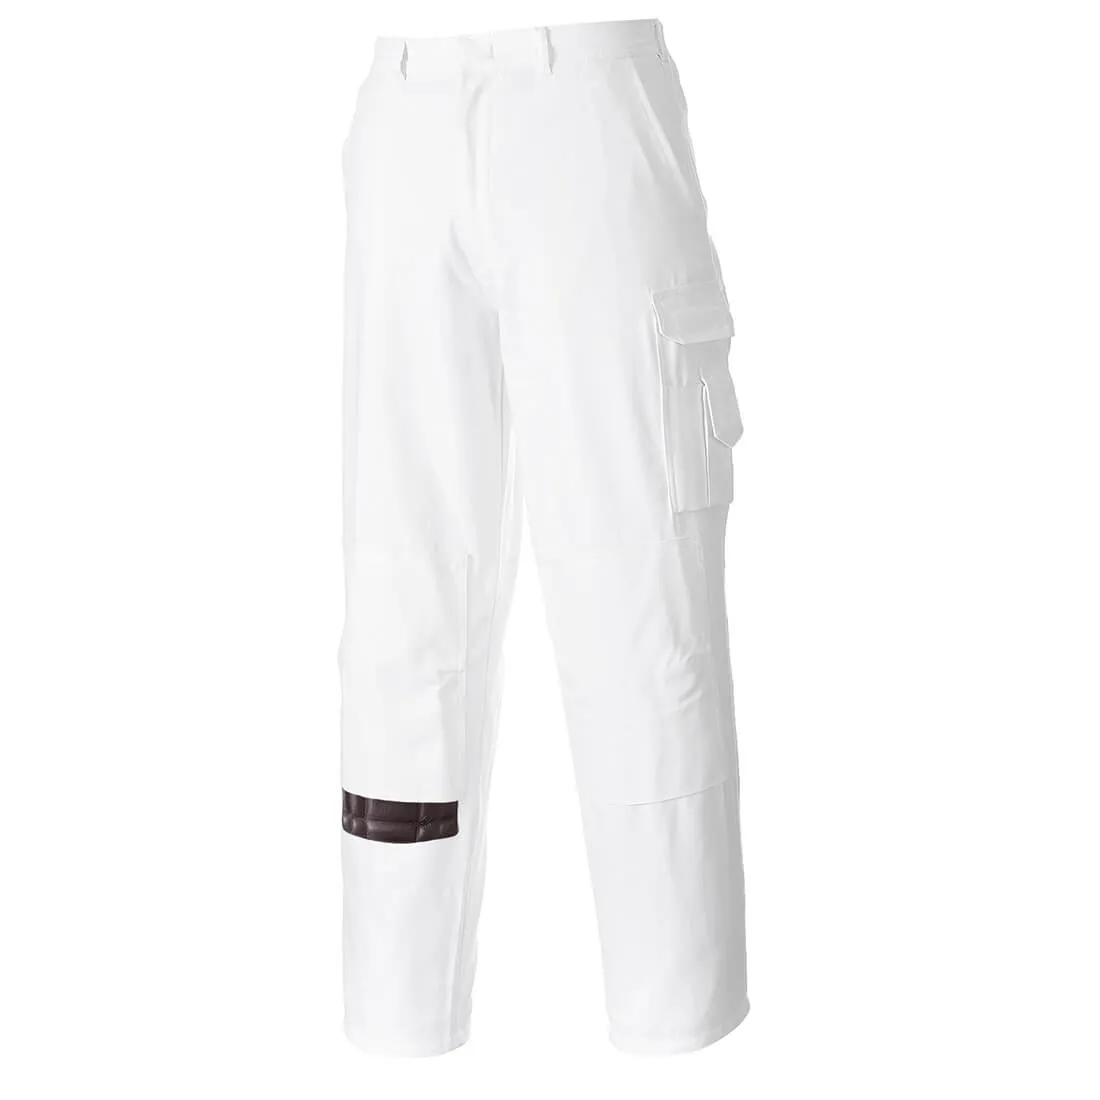 Portwest Painters Trousers - White, Extra Small, 31"